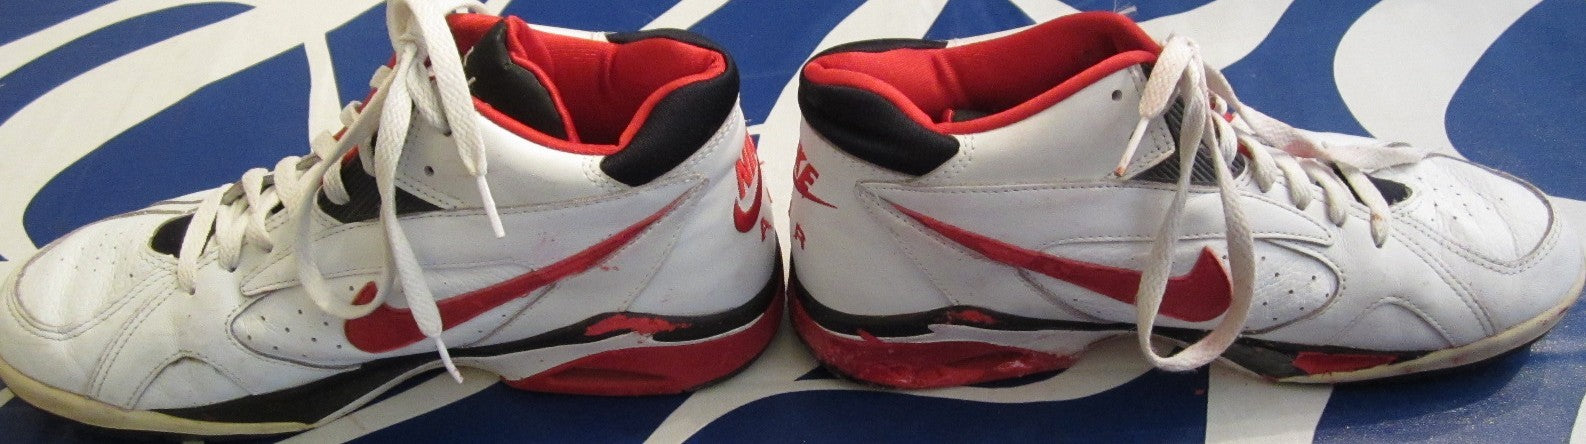 Gary Williams autographed 1994-95 Maryland Terrapins practice worn Nike Air Flight basketball shoes (repaired)